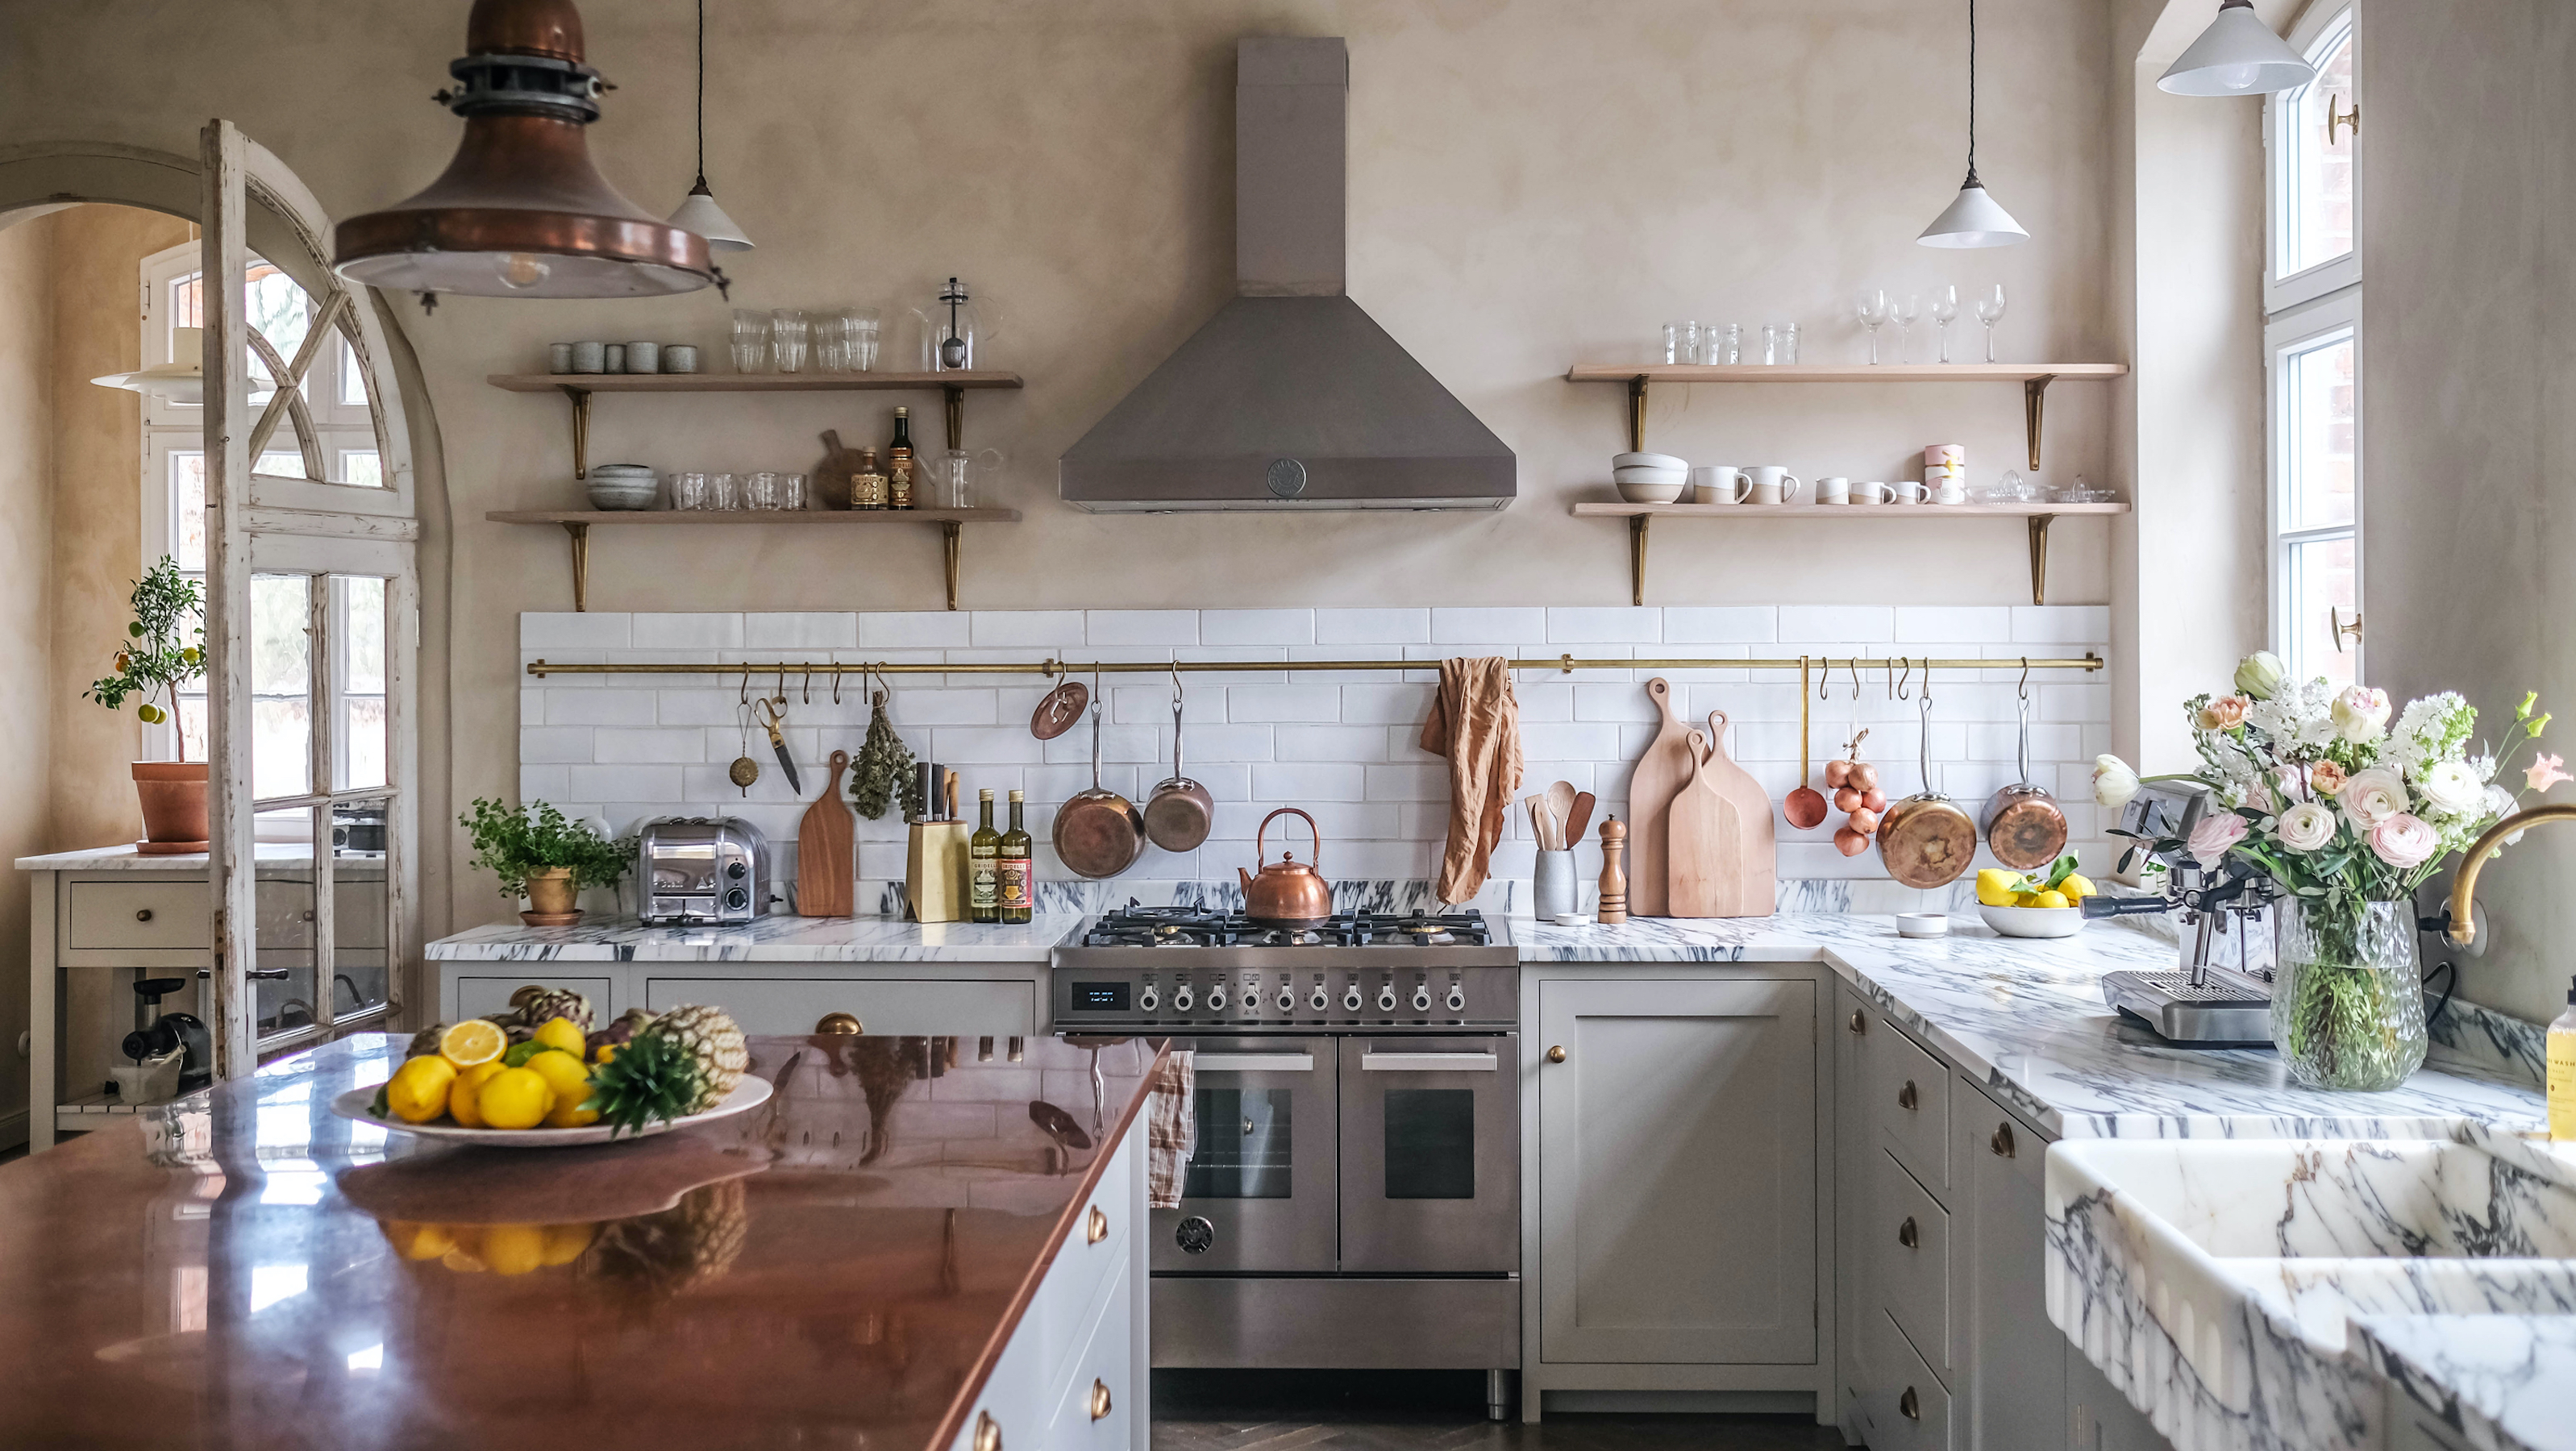 How to create a country kitchen – the key features   Homes & Gardens